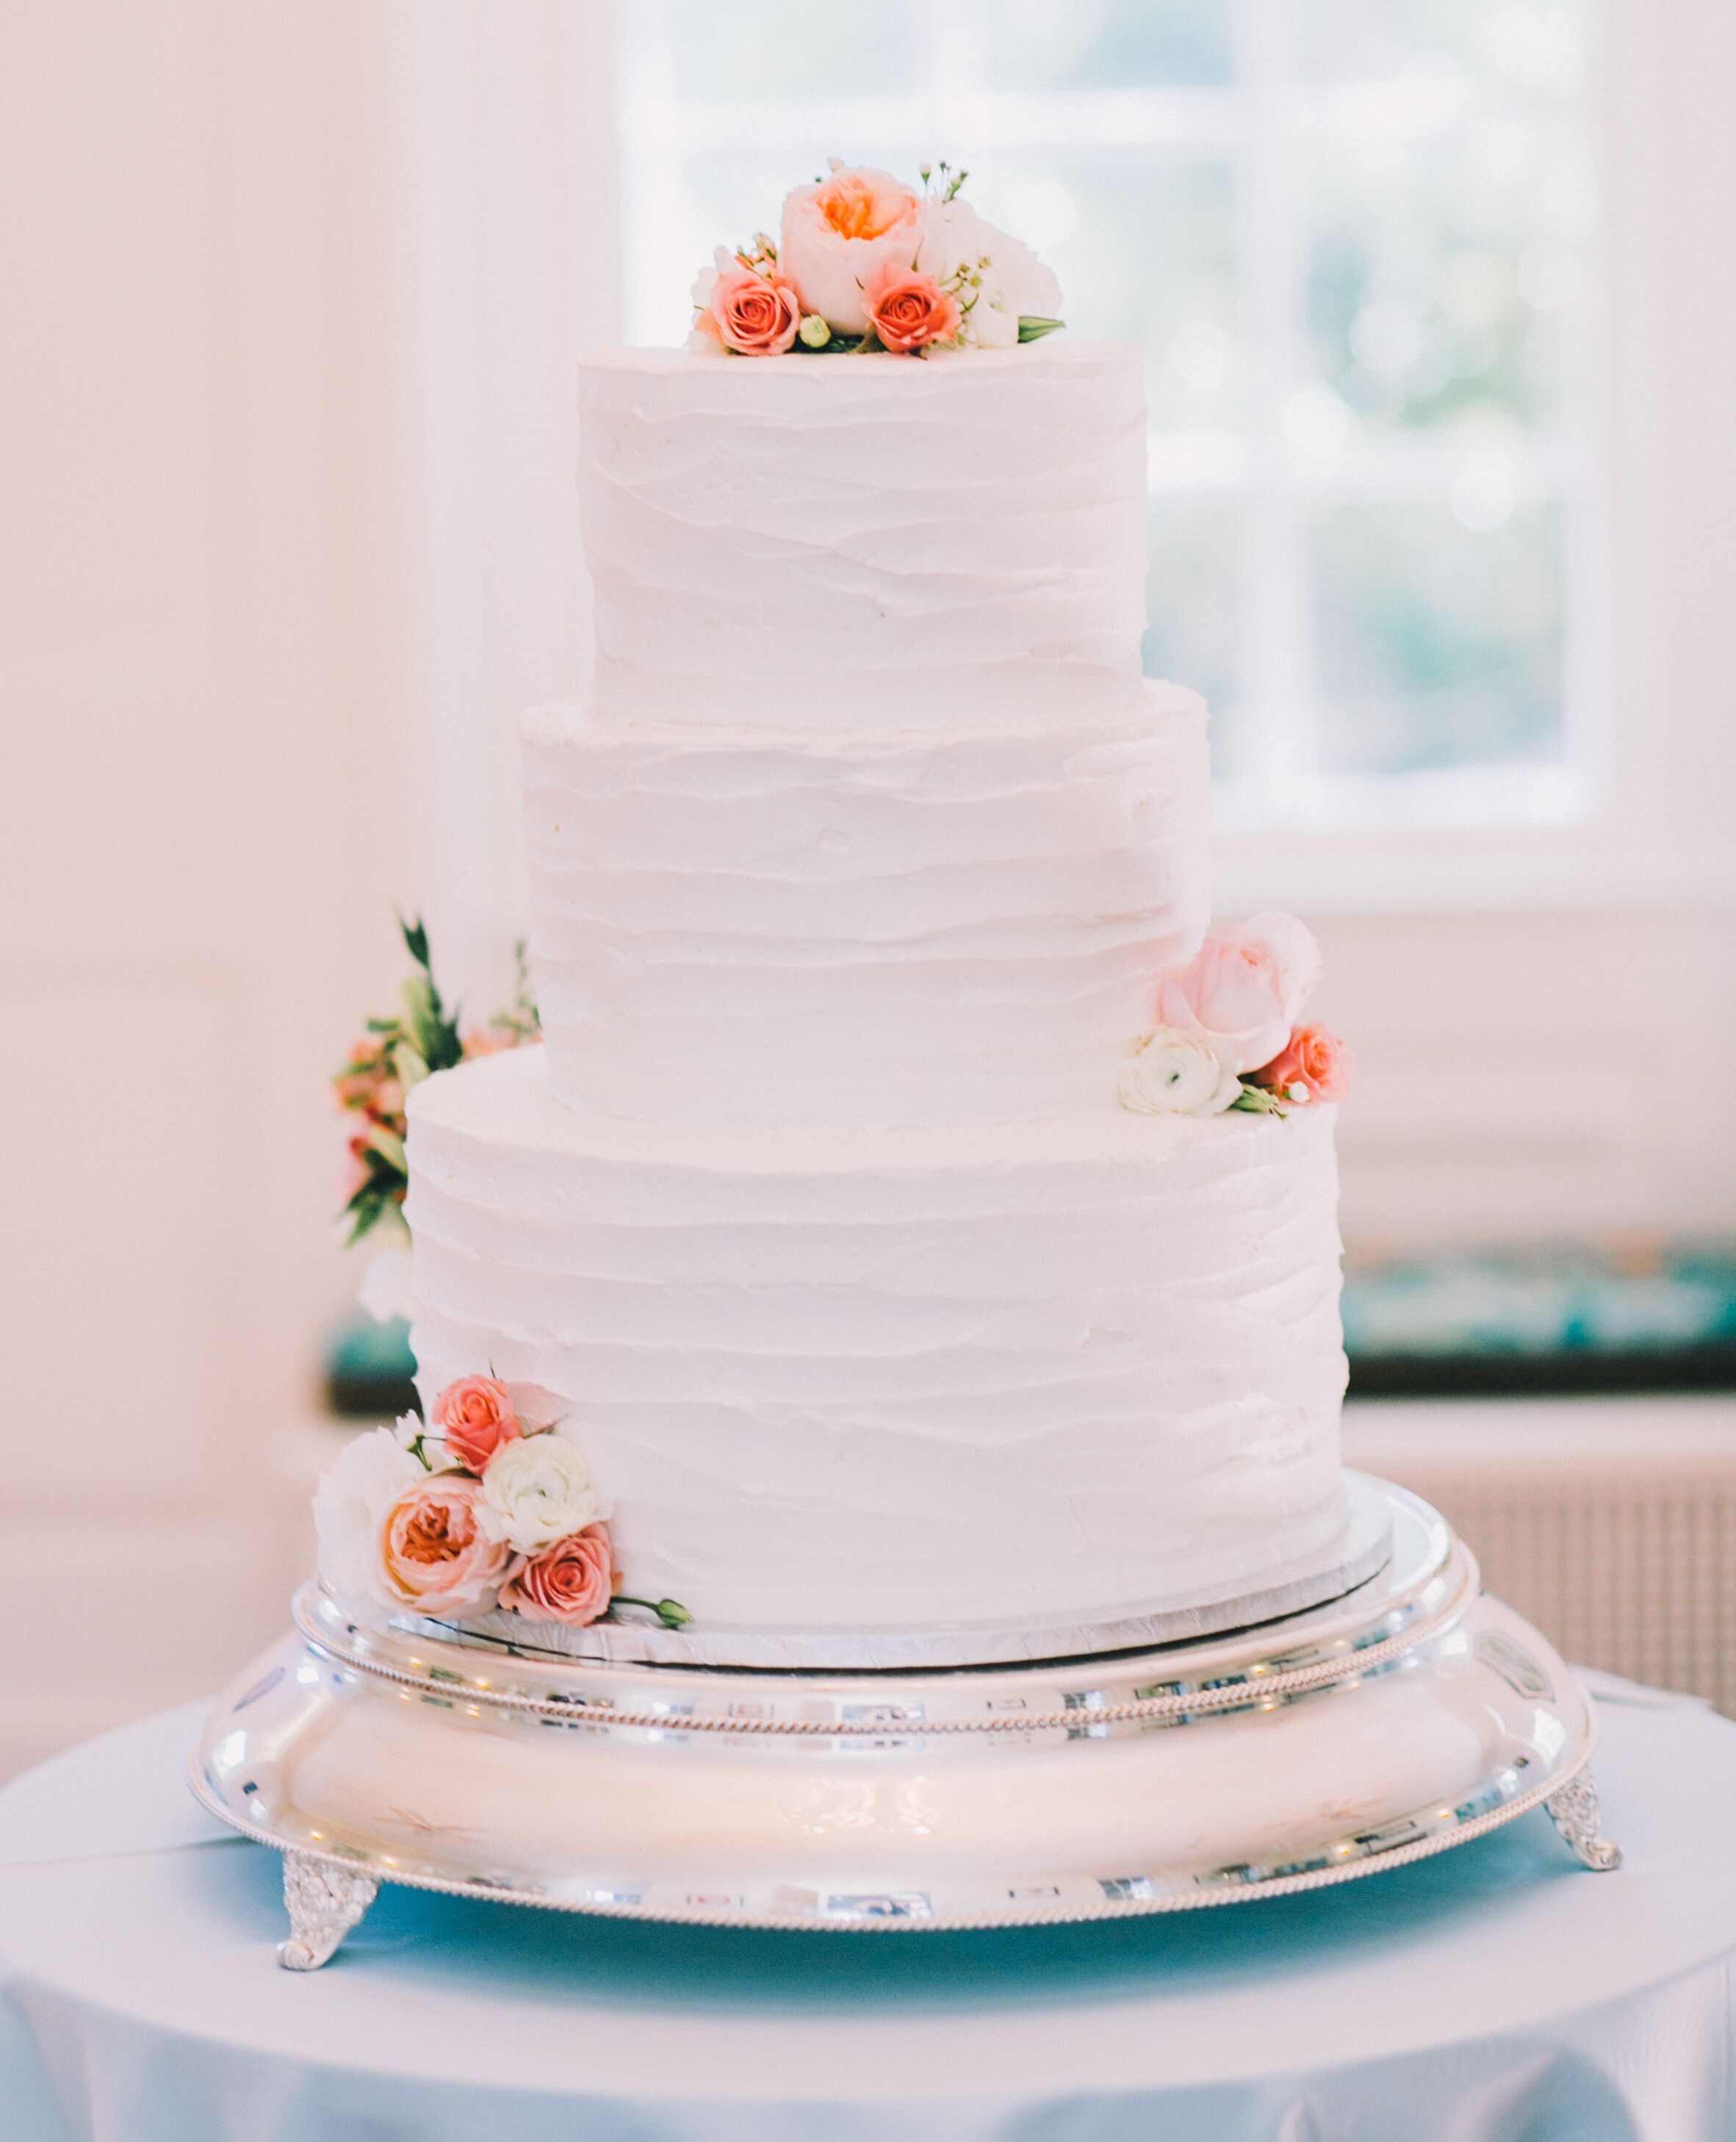 Best Filling In Wedding Cake - Layer Cake Filling Recipes ...